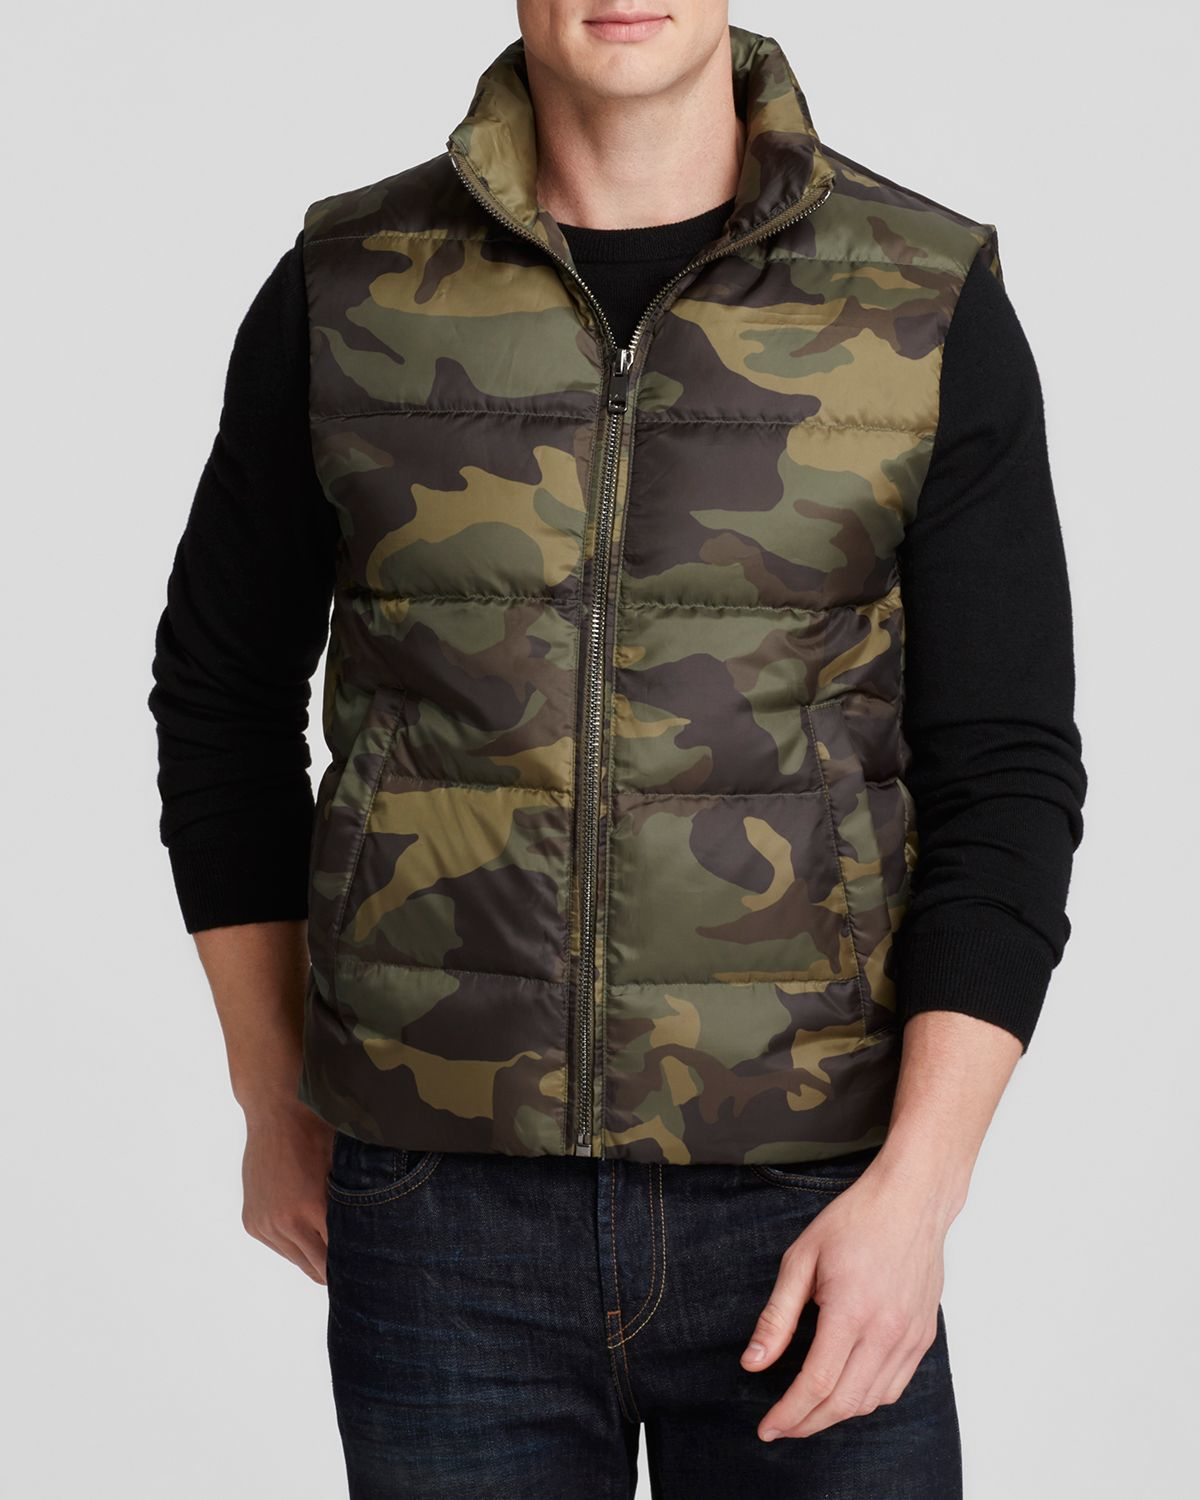 Michael Kors Camo Down Vest in Army (Green) for Men - Lyst